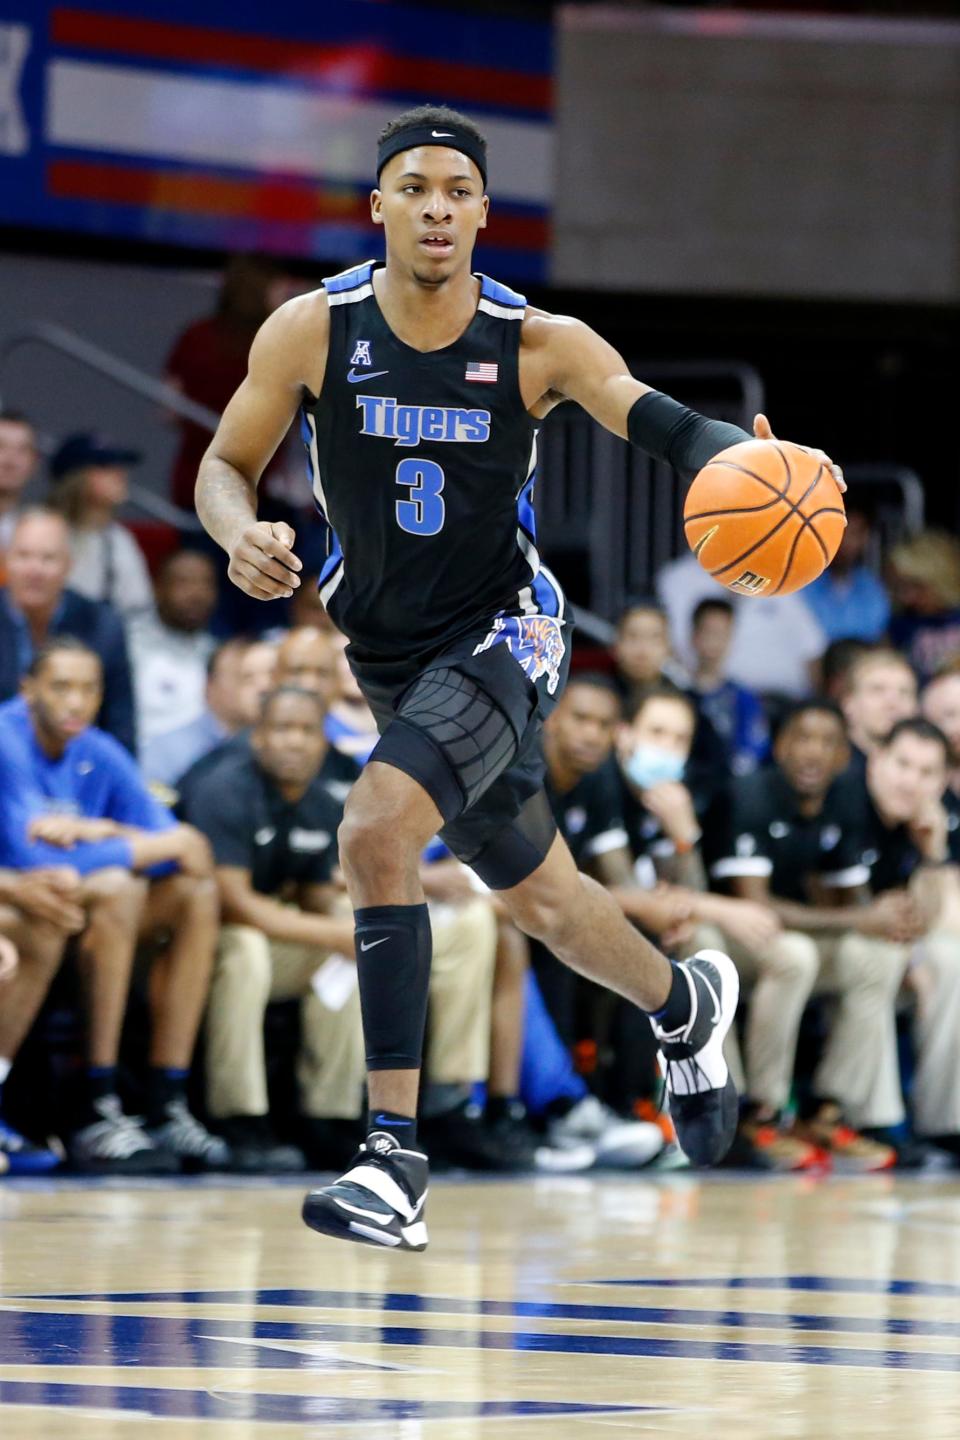 Feb 20, 2022; Dallas, Texas, USA; Memphis Tigers guard Landers Nolley II (3) dribbles up court against the Southern Methodist Mustangs in the first half at Moody Coliseum.